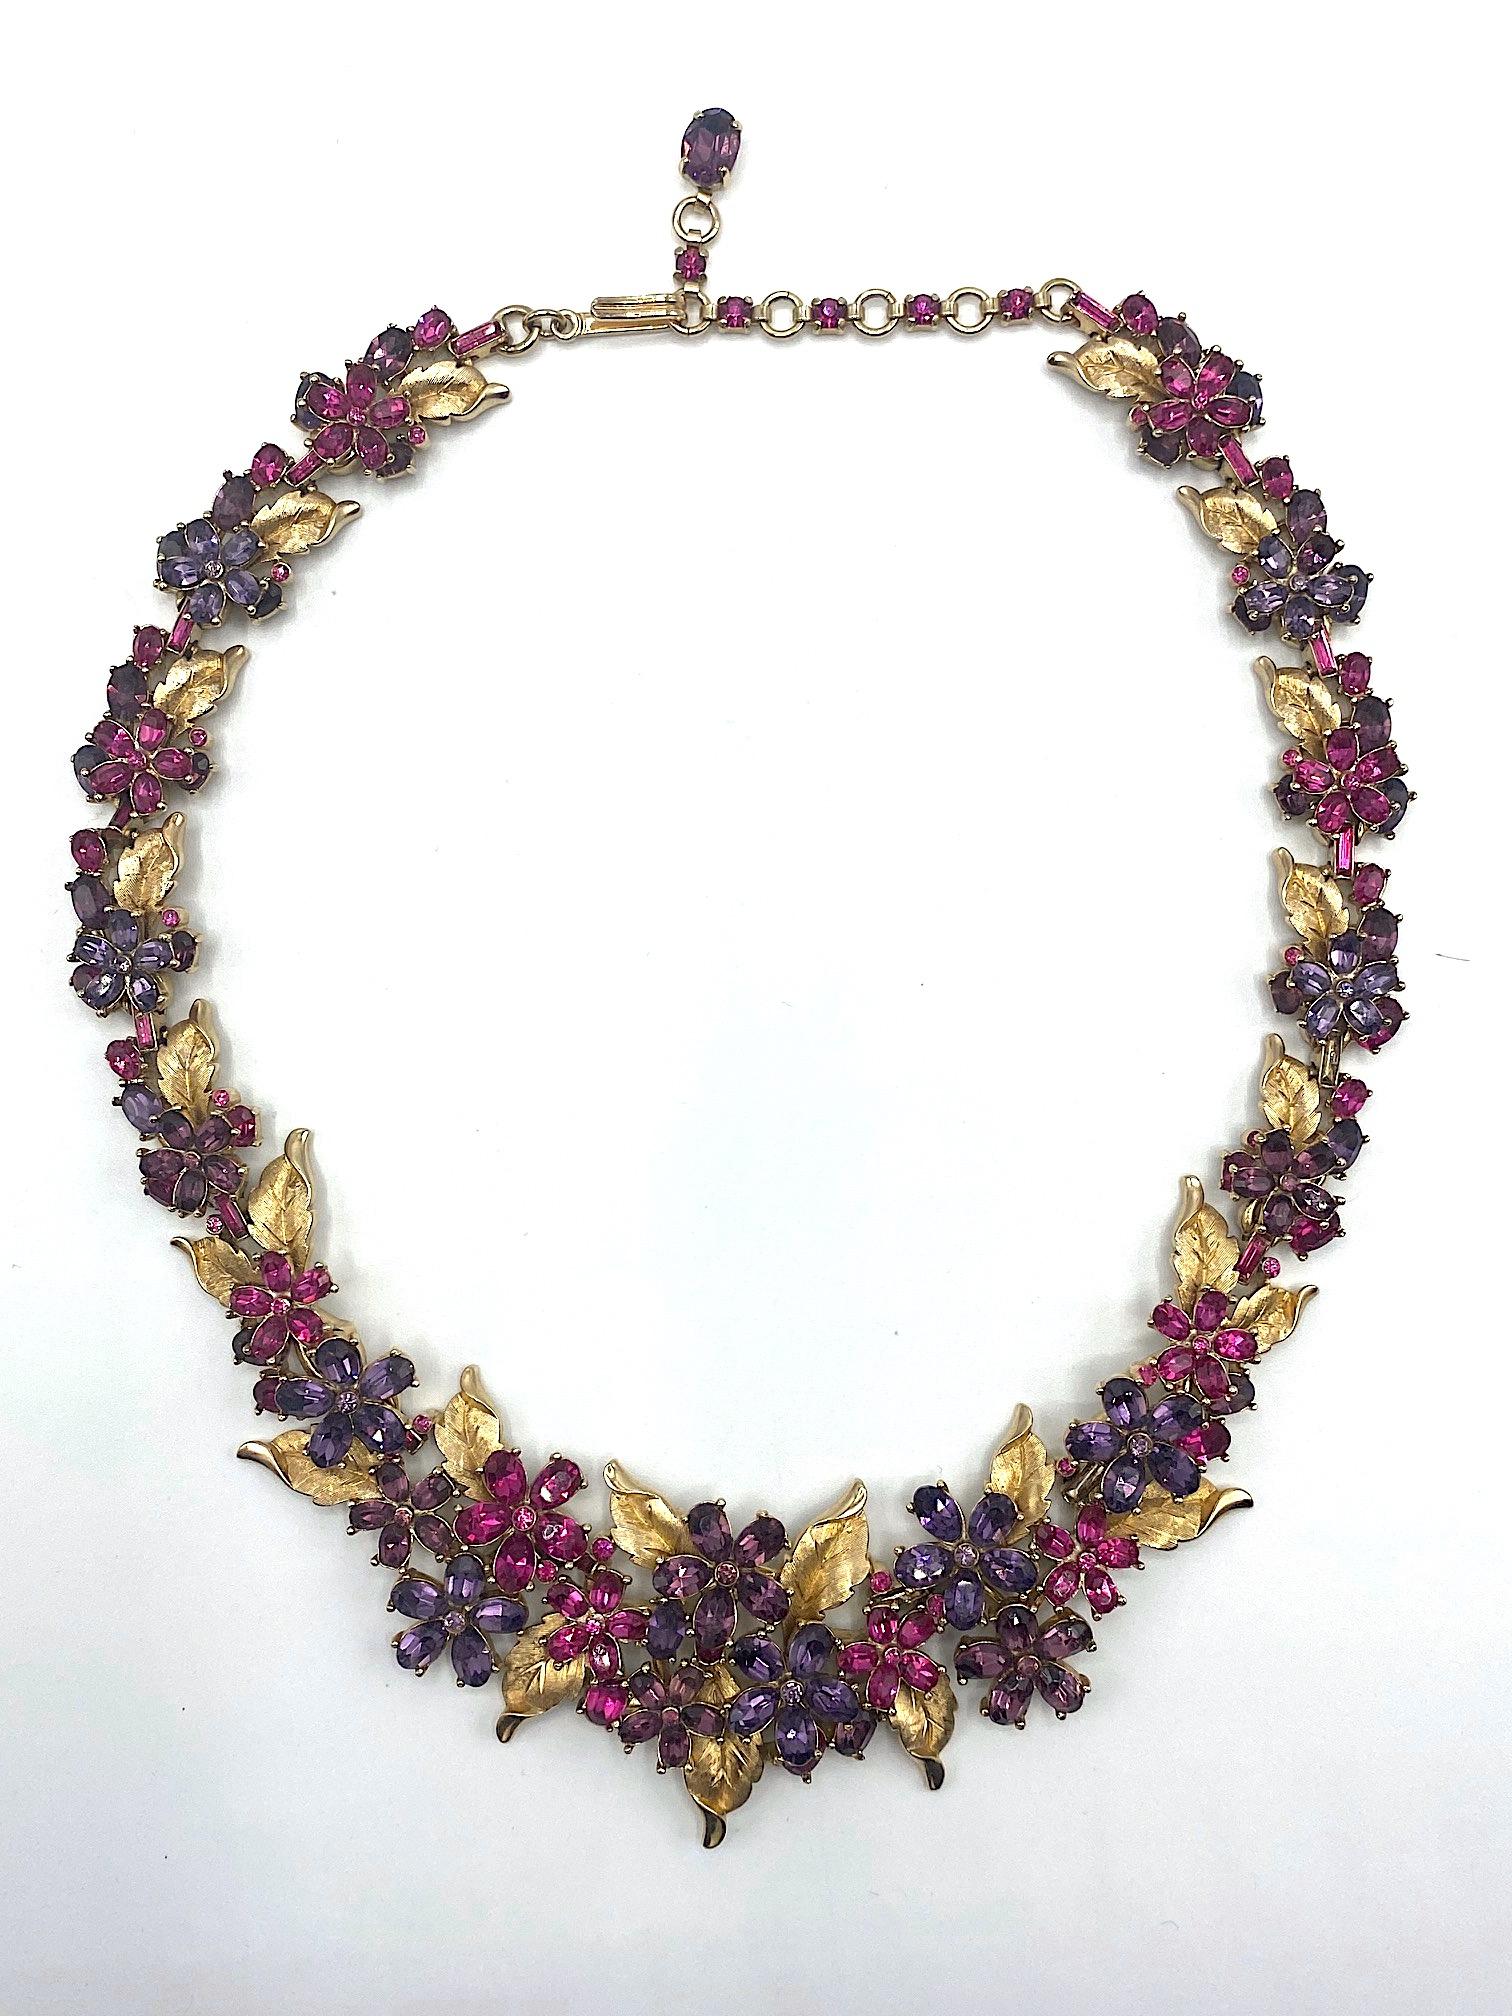 An absolutely spectacular and well loved 1950s floral rhinestone parure by American fashion jewelry company Trifari. The parure consists of necklace, bracelet, earrings and brooch. All in extremely fine condition and look barely worn. There are